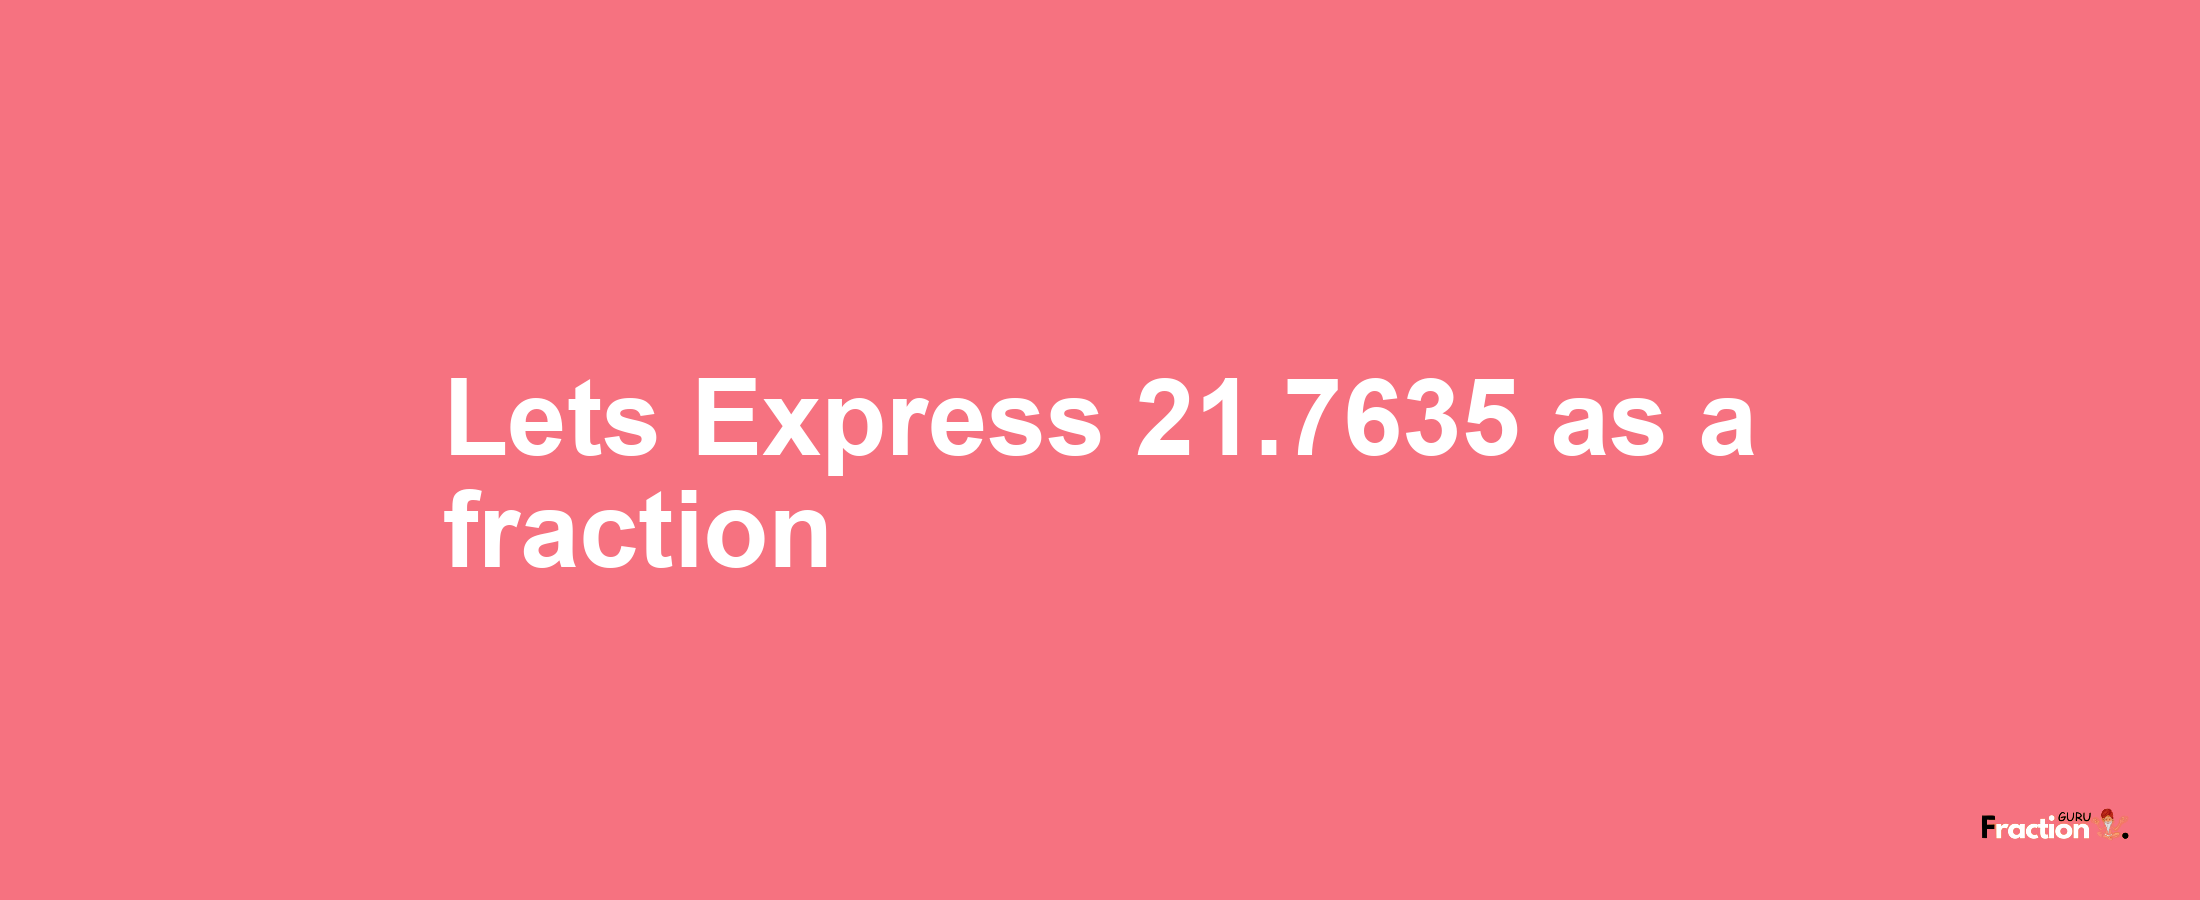 Lets Express 21.7635 as afraction